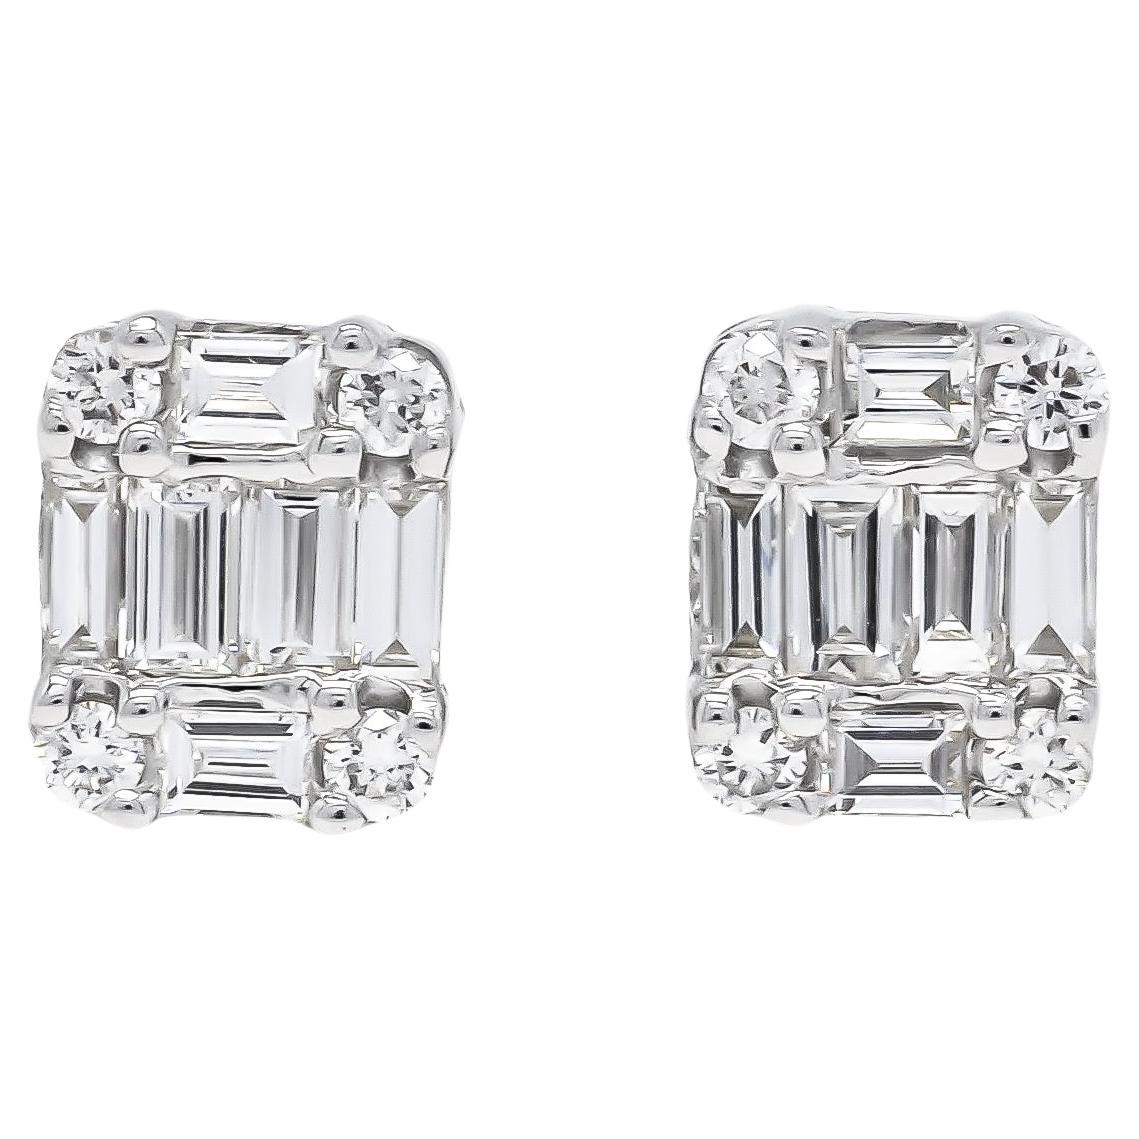 Natural Diamond 0.52 carats 18KT White Gold Cluster Stud Earrings 